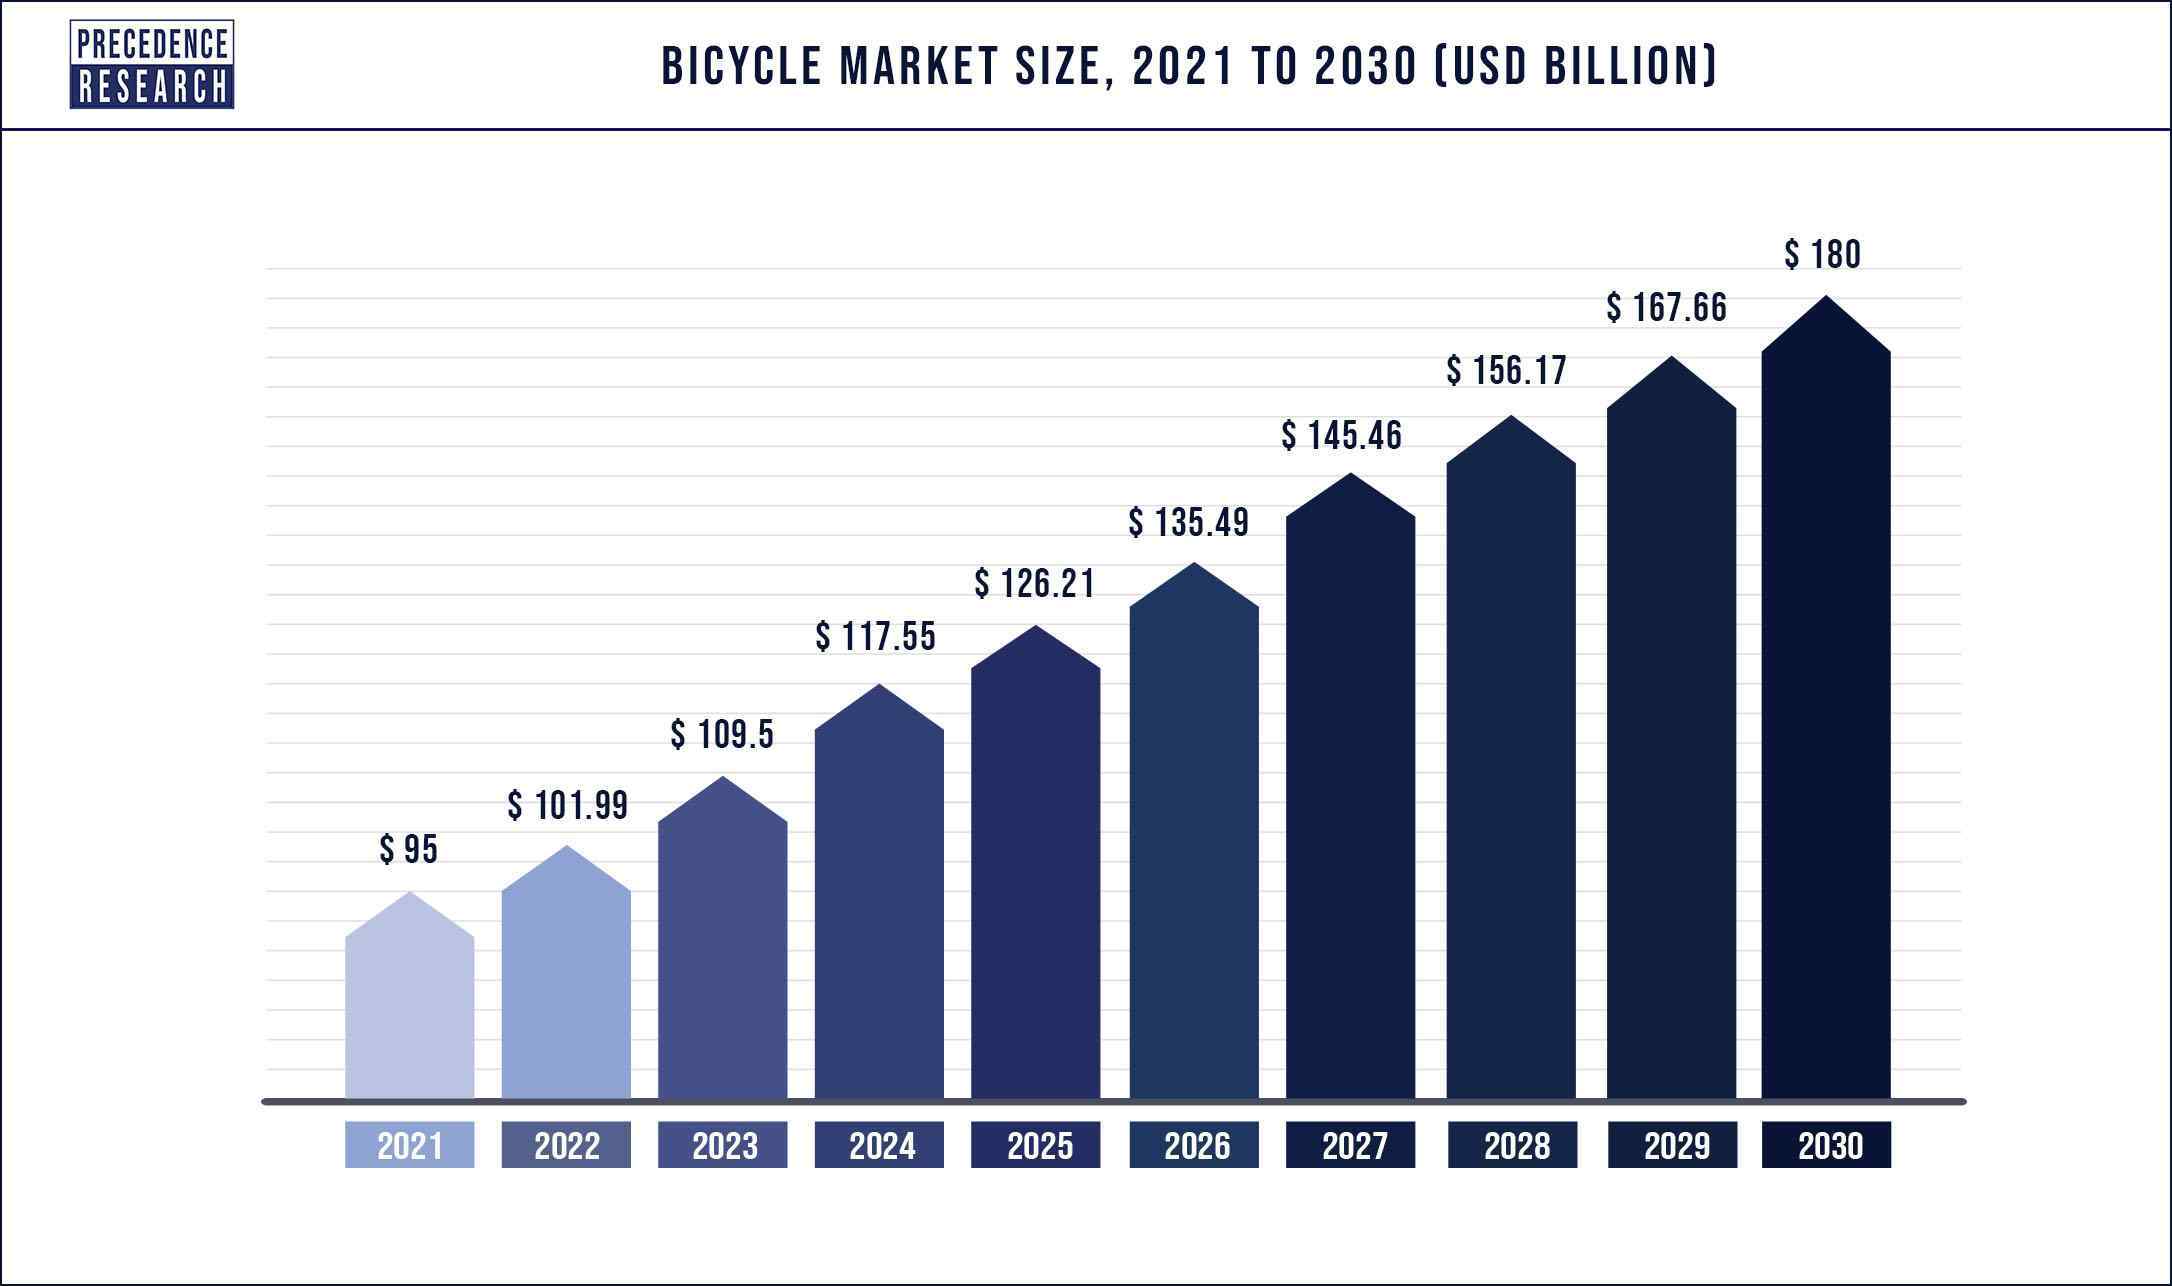 Bicycle Market Size to Hit Around US$ 180 Billion by 2030